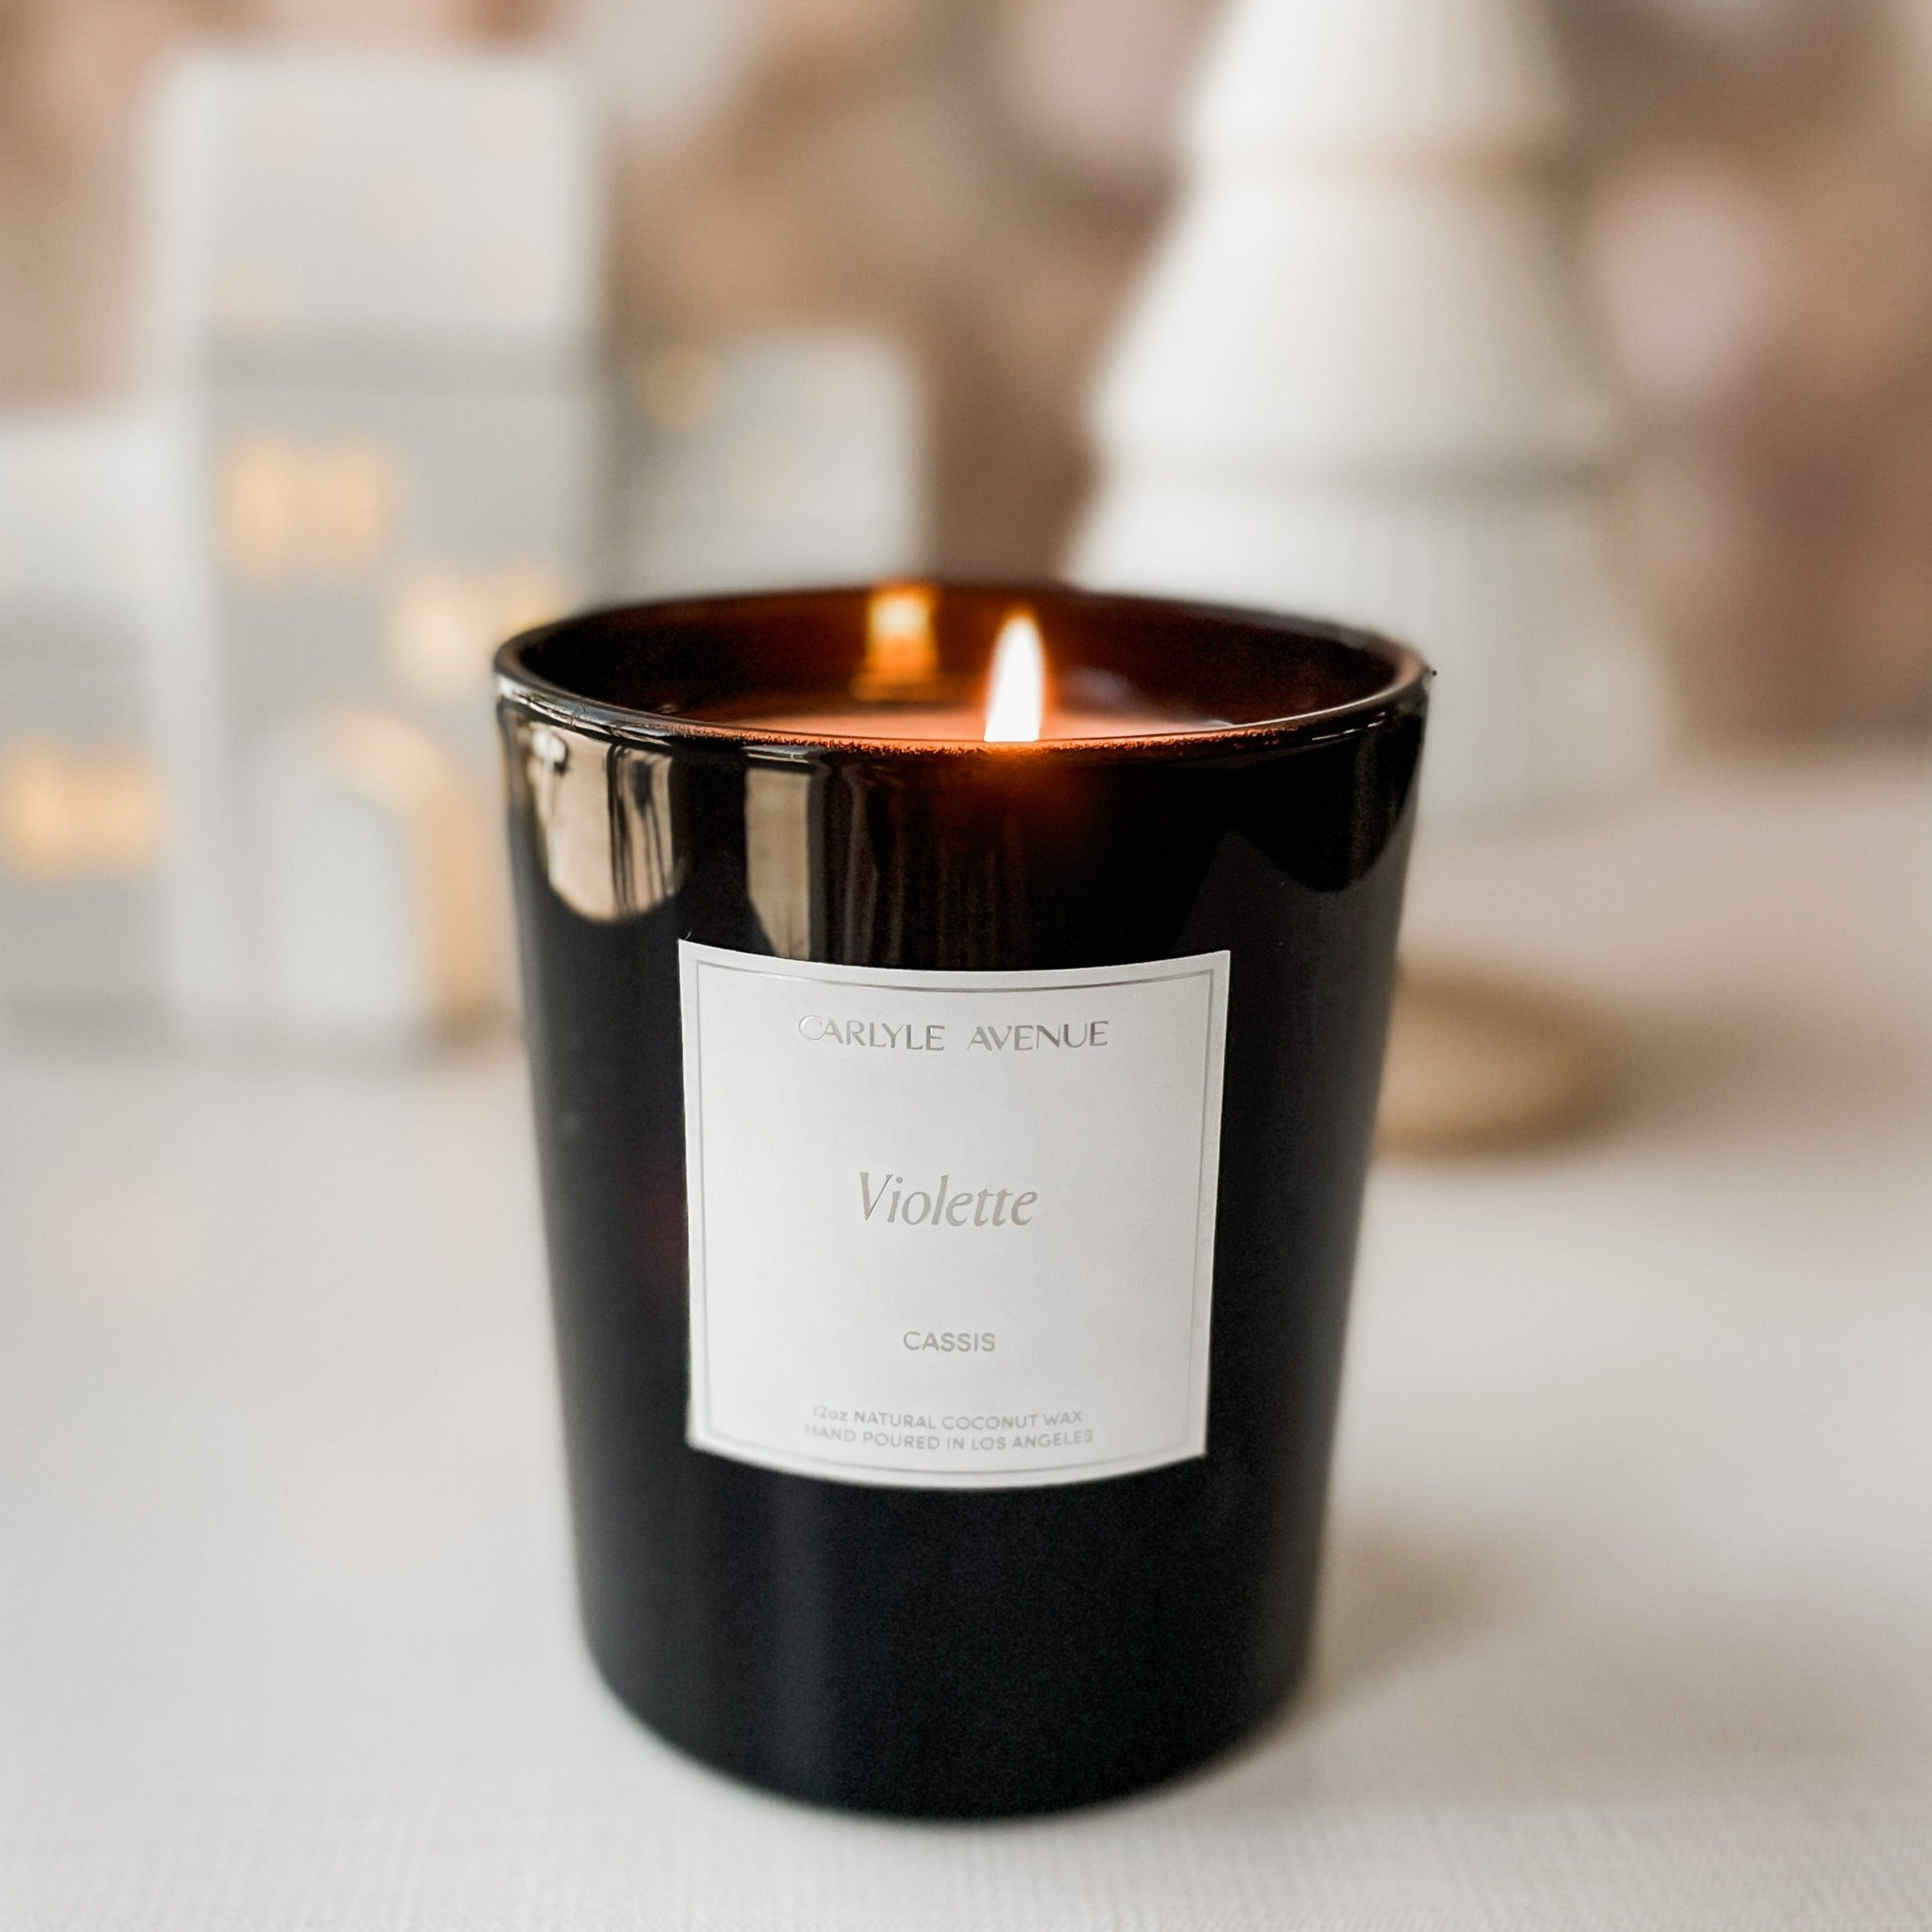 Carlyle Avenue Holiday Candles